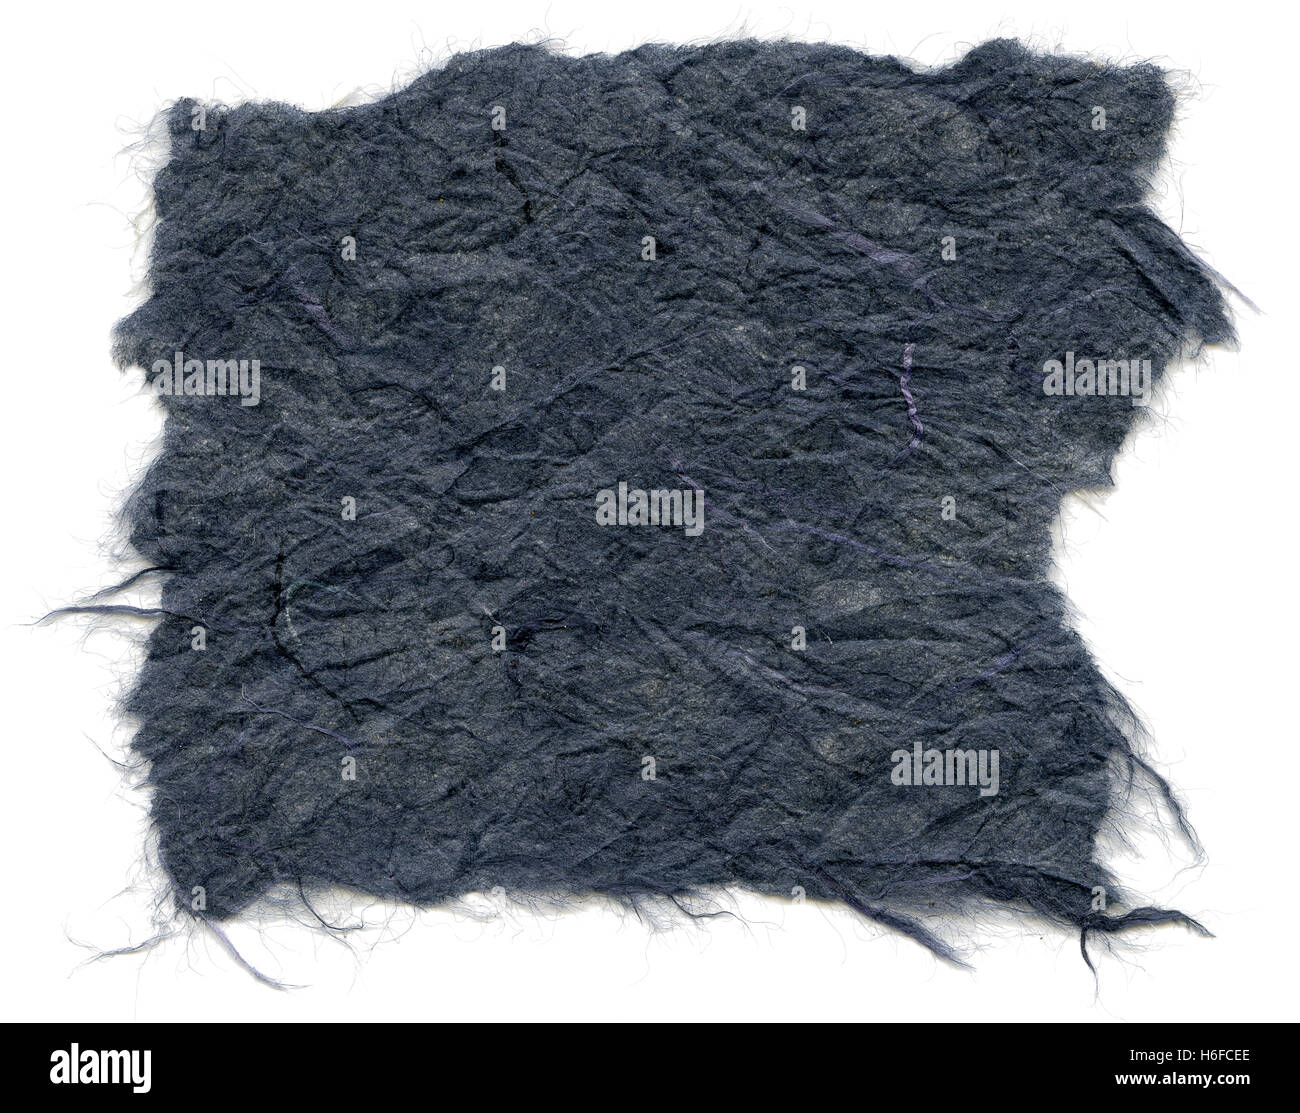 Texture of navy blue rice paper with torn edges. Isolated on white background. Scanned at 2400dpi using a professional scanner. Stock Photo